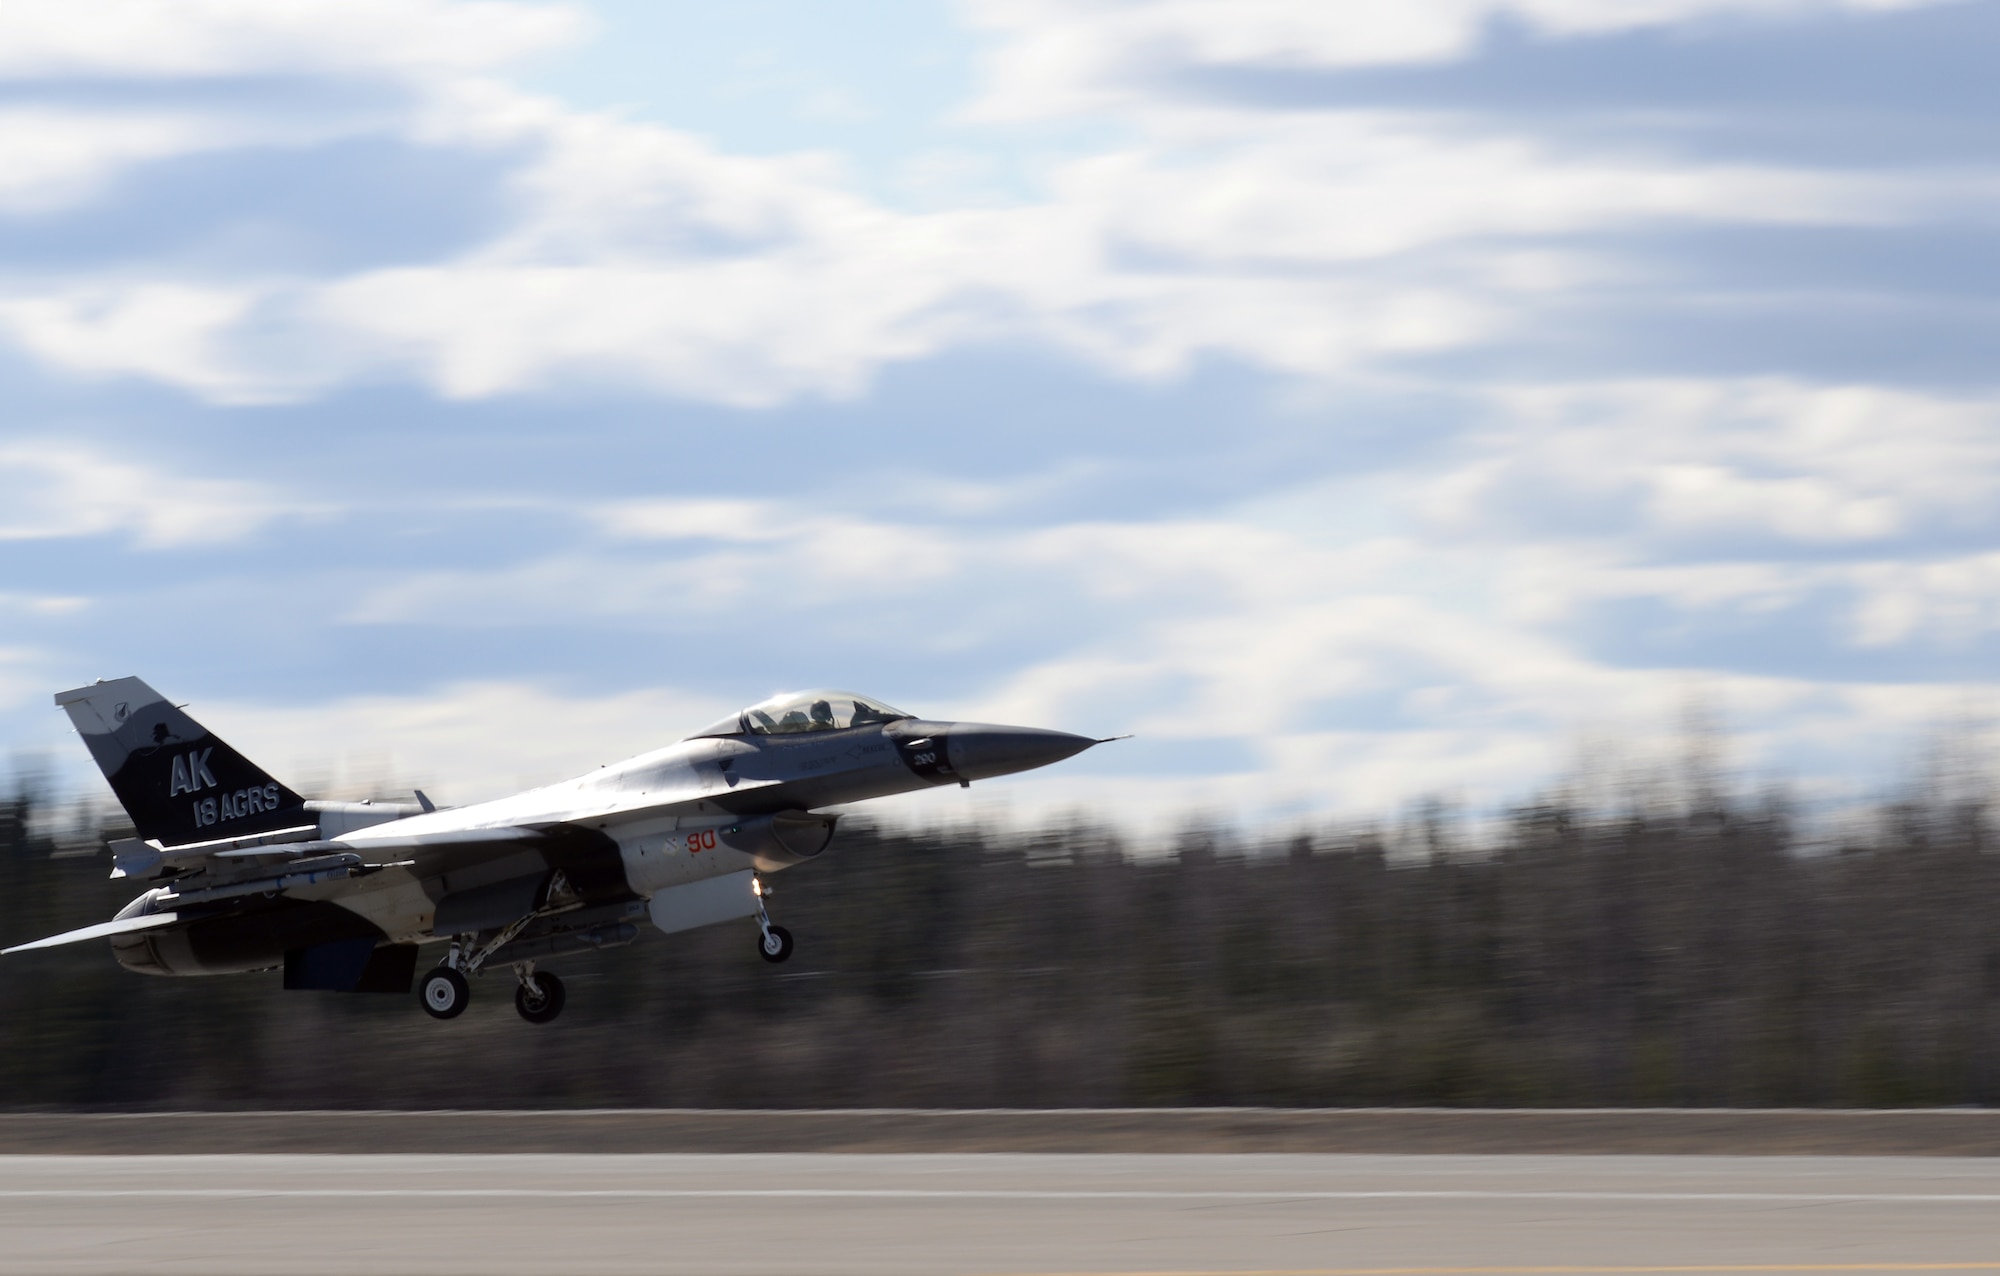 A U.S. Air Force F-16 Fighting Falcon aircraft assigned to the 18th Aggressor Squadron takes off from Eielson Air Force Base, Alaska, April 27, 2015, to participate in a Distant Frontier mission with F-16 pilots and aircraft deployed from the 113th Wing, District of Columbia Air National Guard. Distant Frontier provided the deployed pilots an opportunity to fly orientation flights in the more than 67,000 square-mile Joint Pacific Alaska Range Complex, become familiar with local flying restrictions, receive local safety and survival briefings, and develop orientation plans during the week prior to RED FLAG-Alaska 15-2, a Pacific Air Forces-directed field training exercise flown under simulated air combat conditions to increases combat capability. (U.S. Air Force photo by Master Sgt. Karen J. Tomasik/Released)